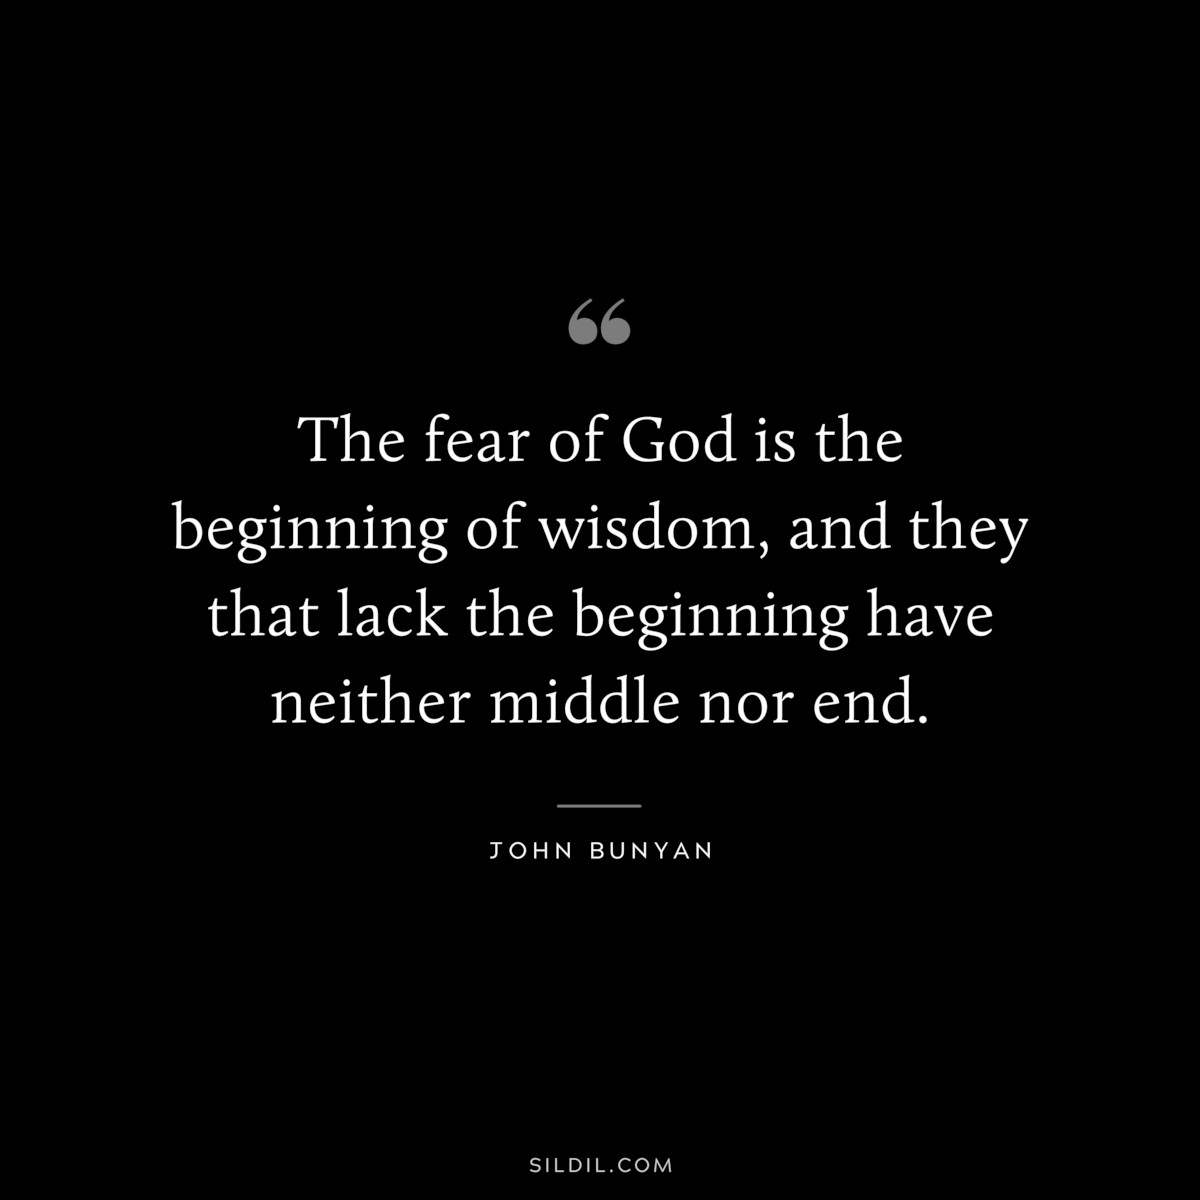 The fear of God is the beginning of wisdom, and they that lack the beginning have neither middle nor end. ― John Bunyan